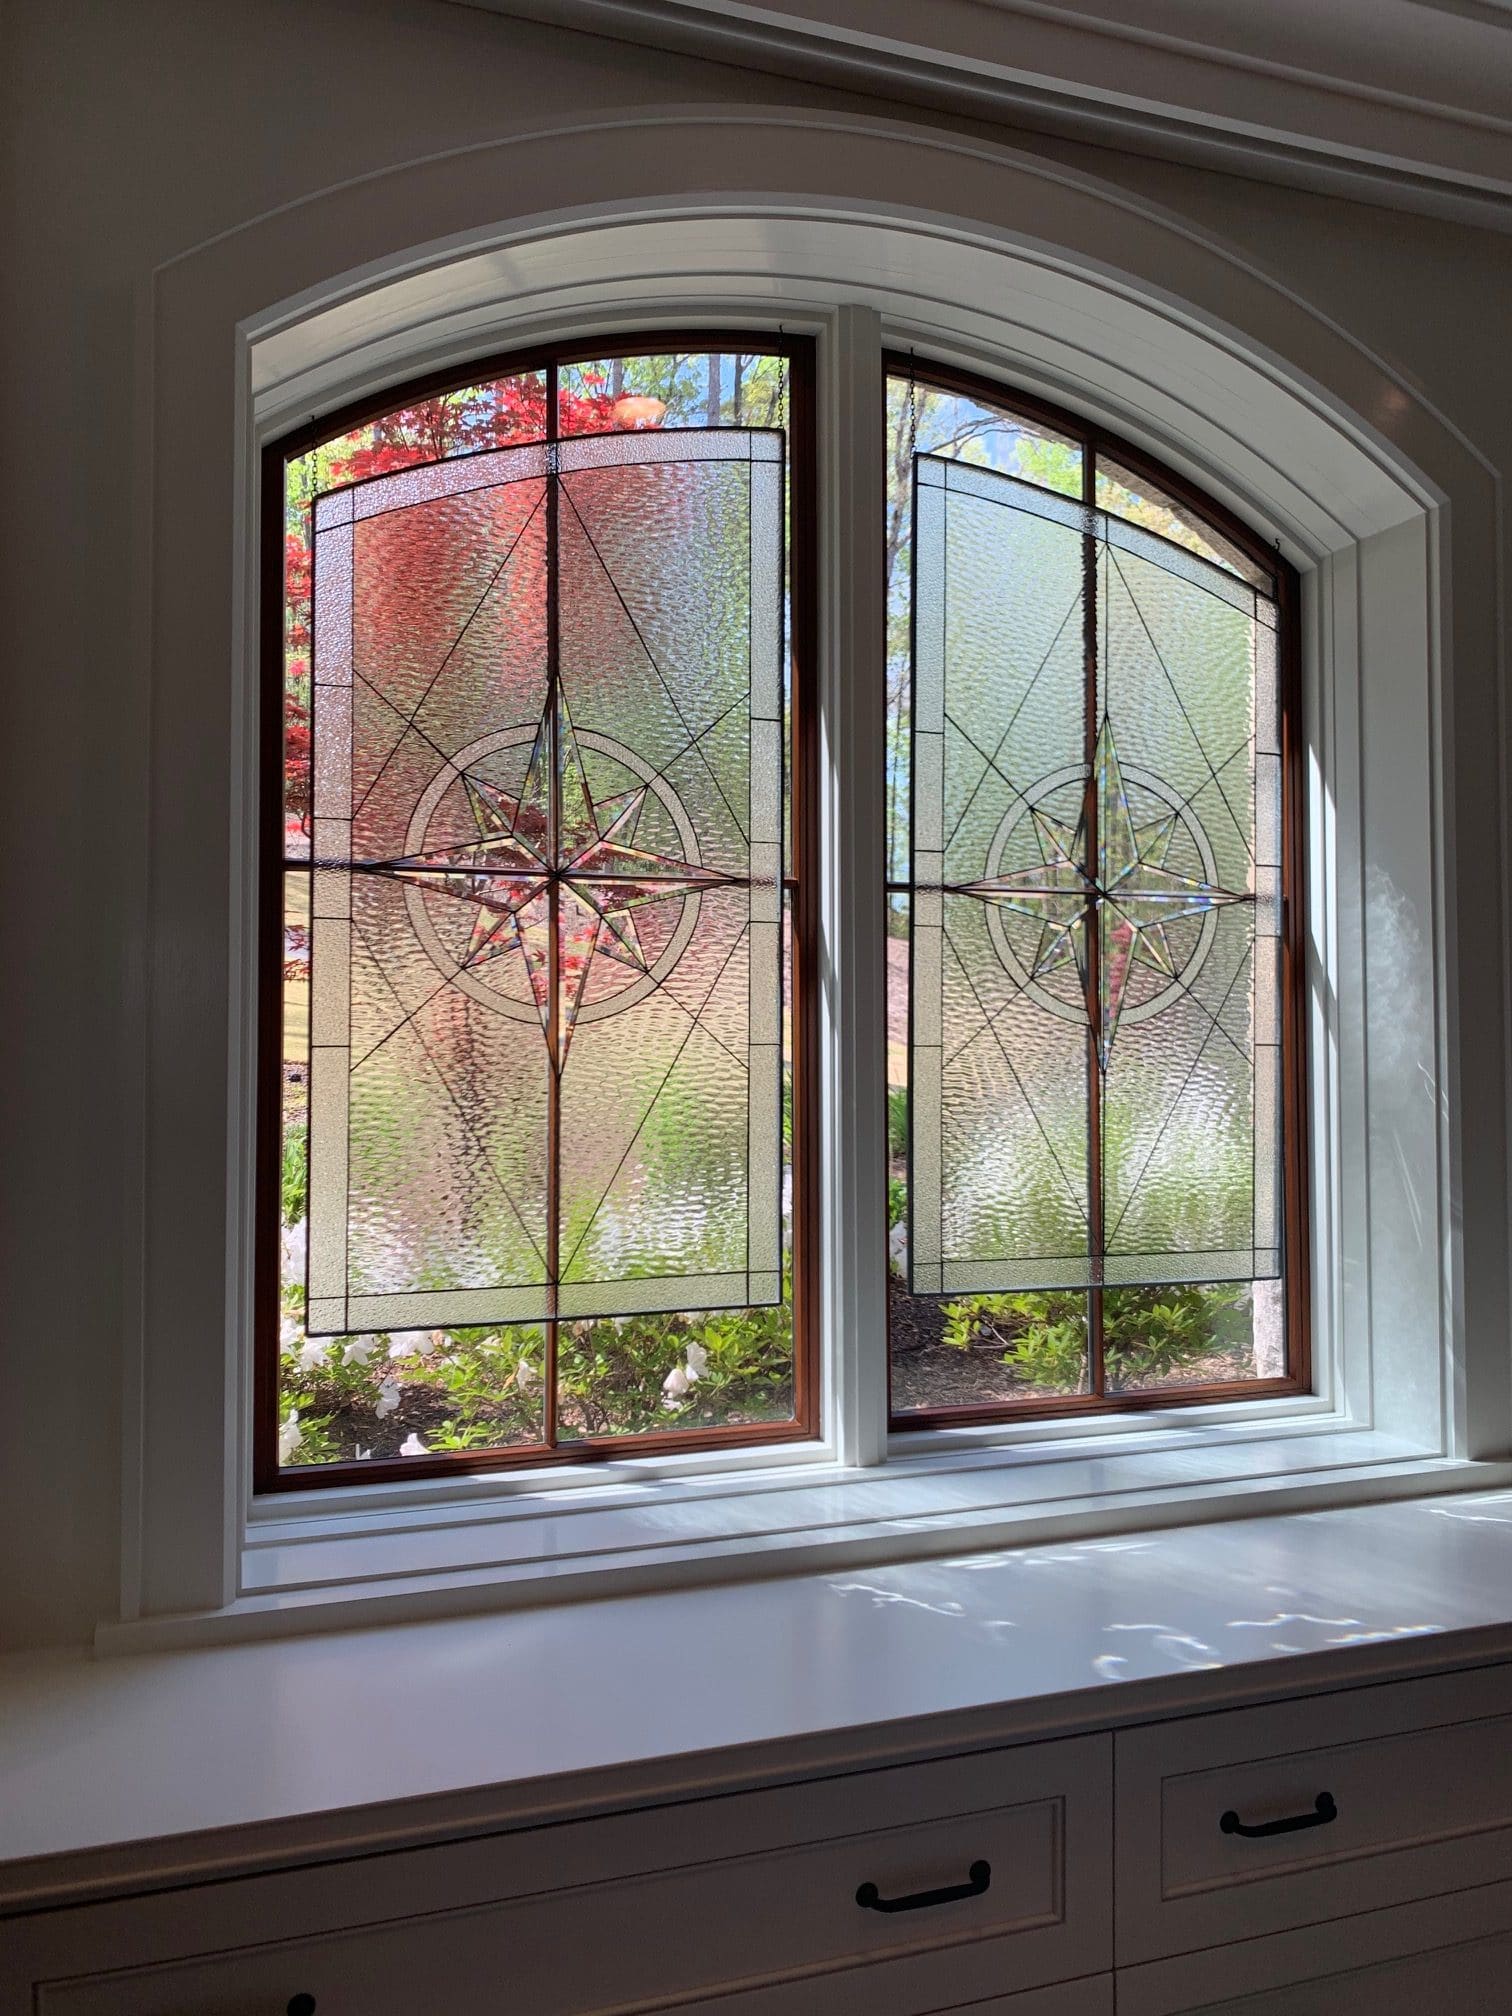 Clear Stained Glass Window Hung in front of their current window, provide privacy and beauty